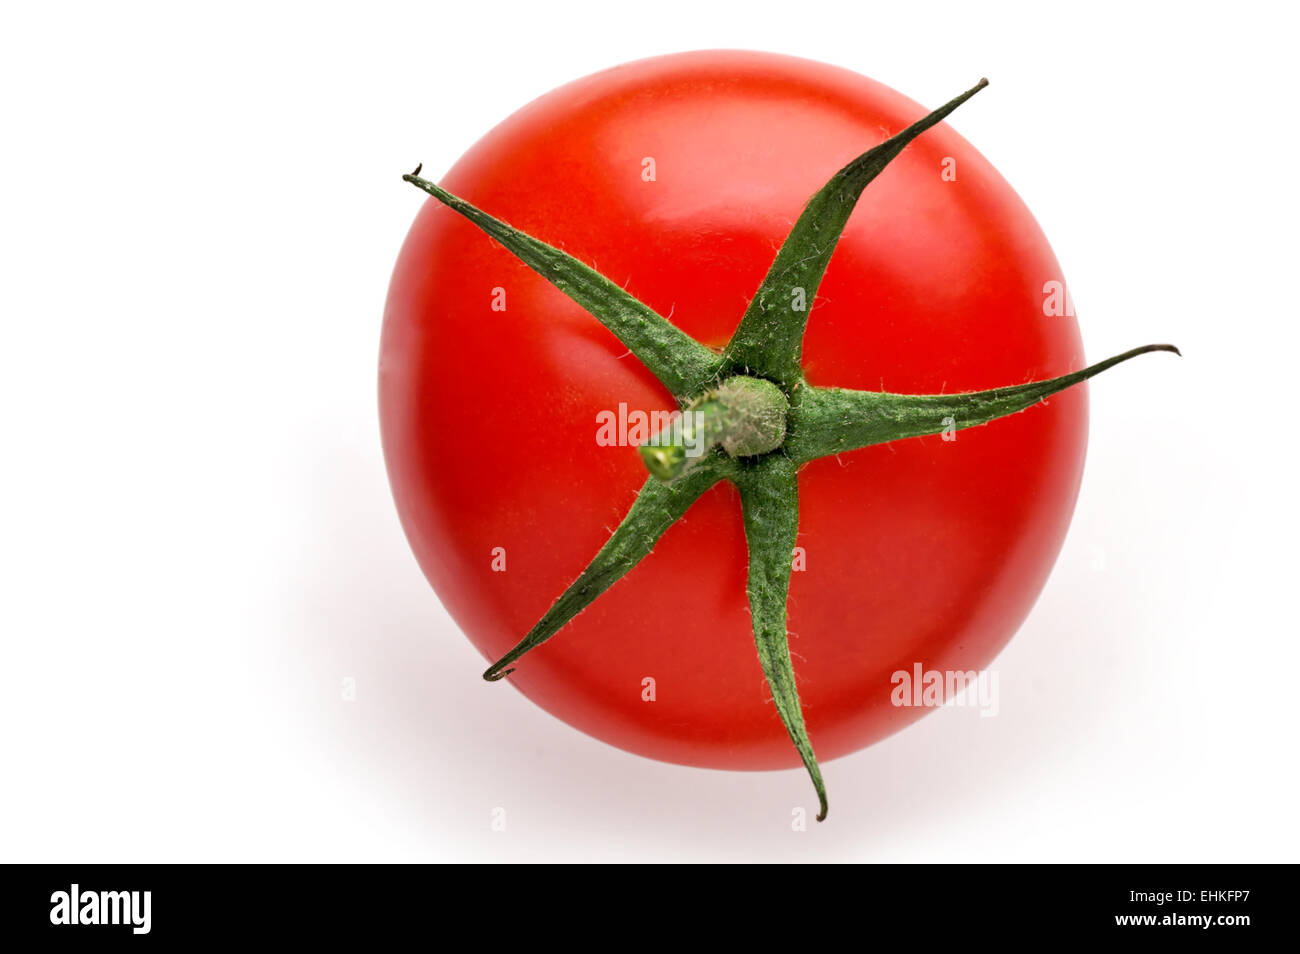 isolated tomato high angle view with clipping path Stock Photo